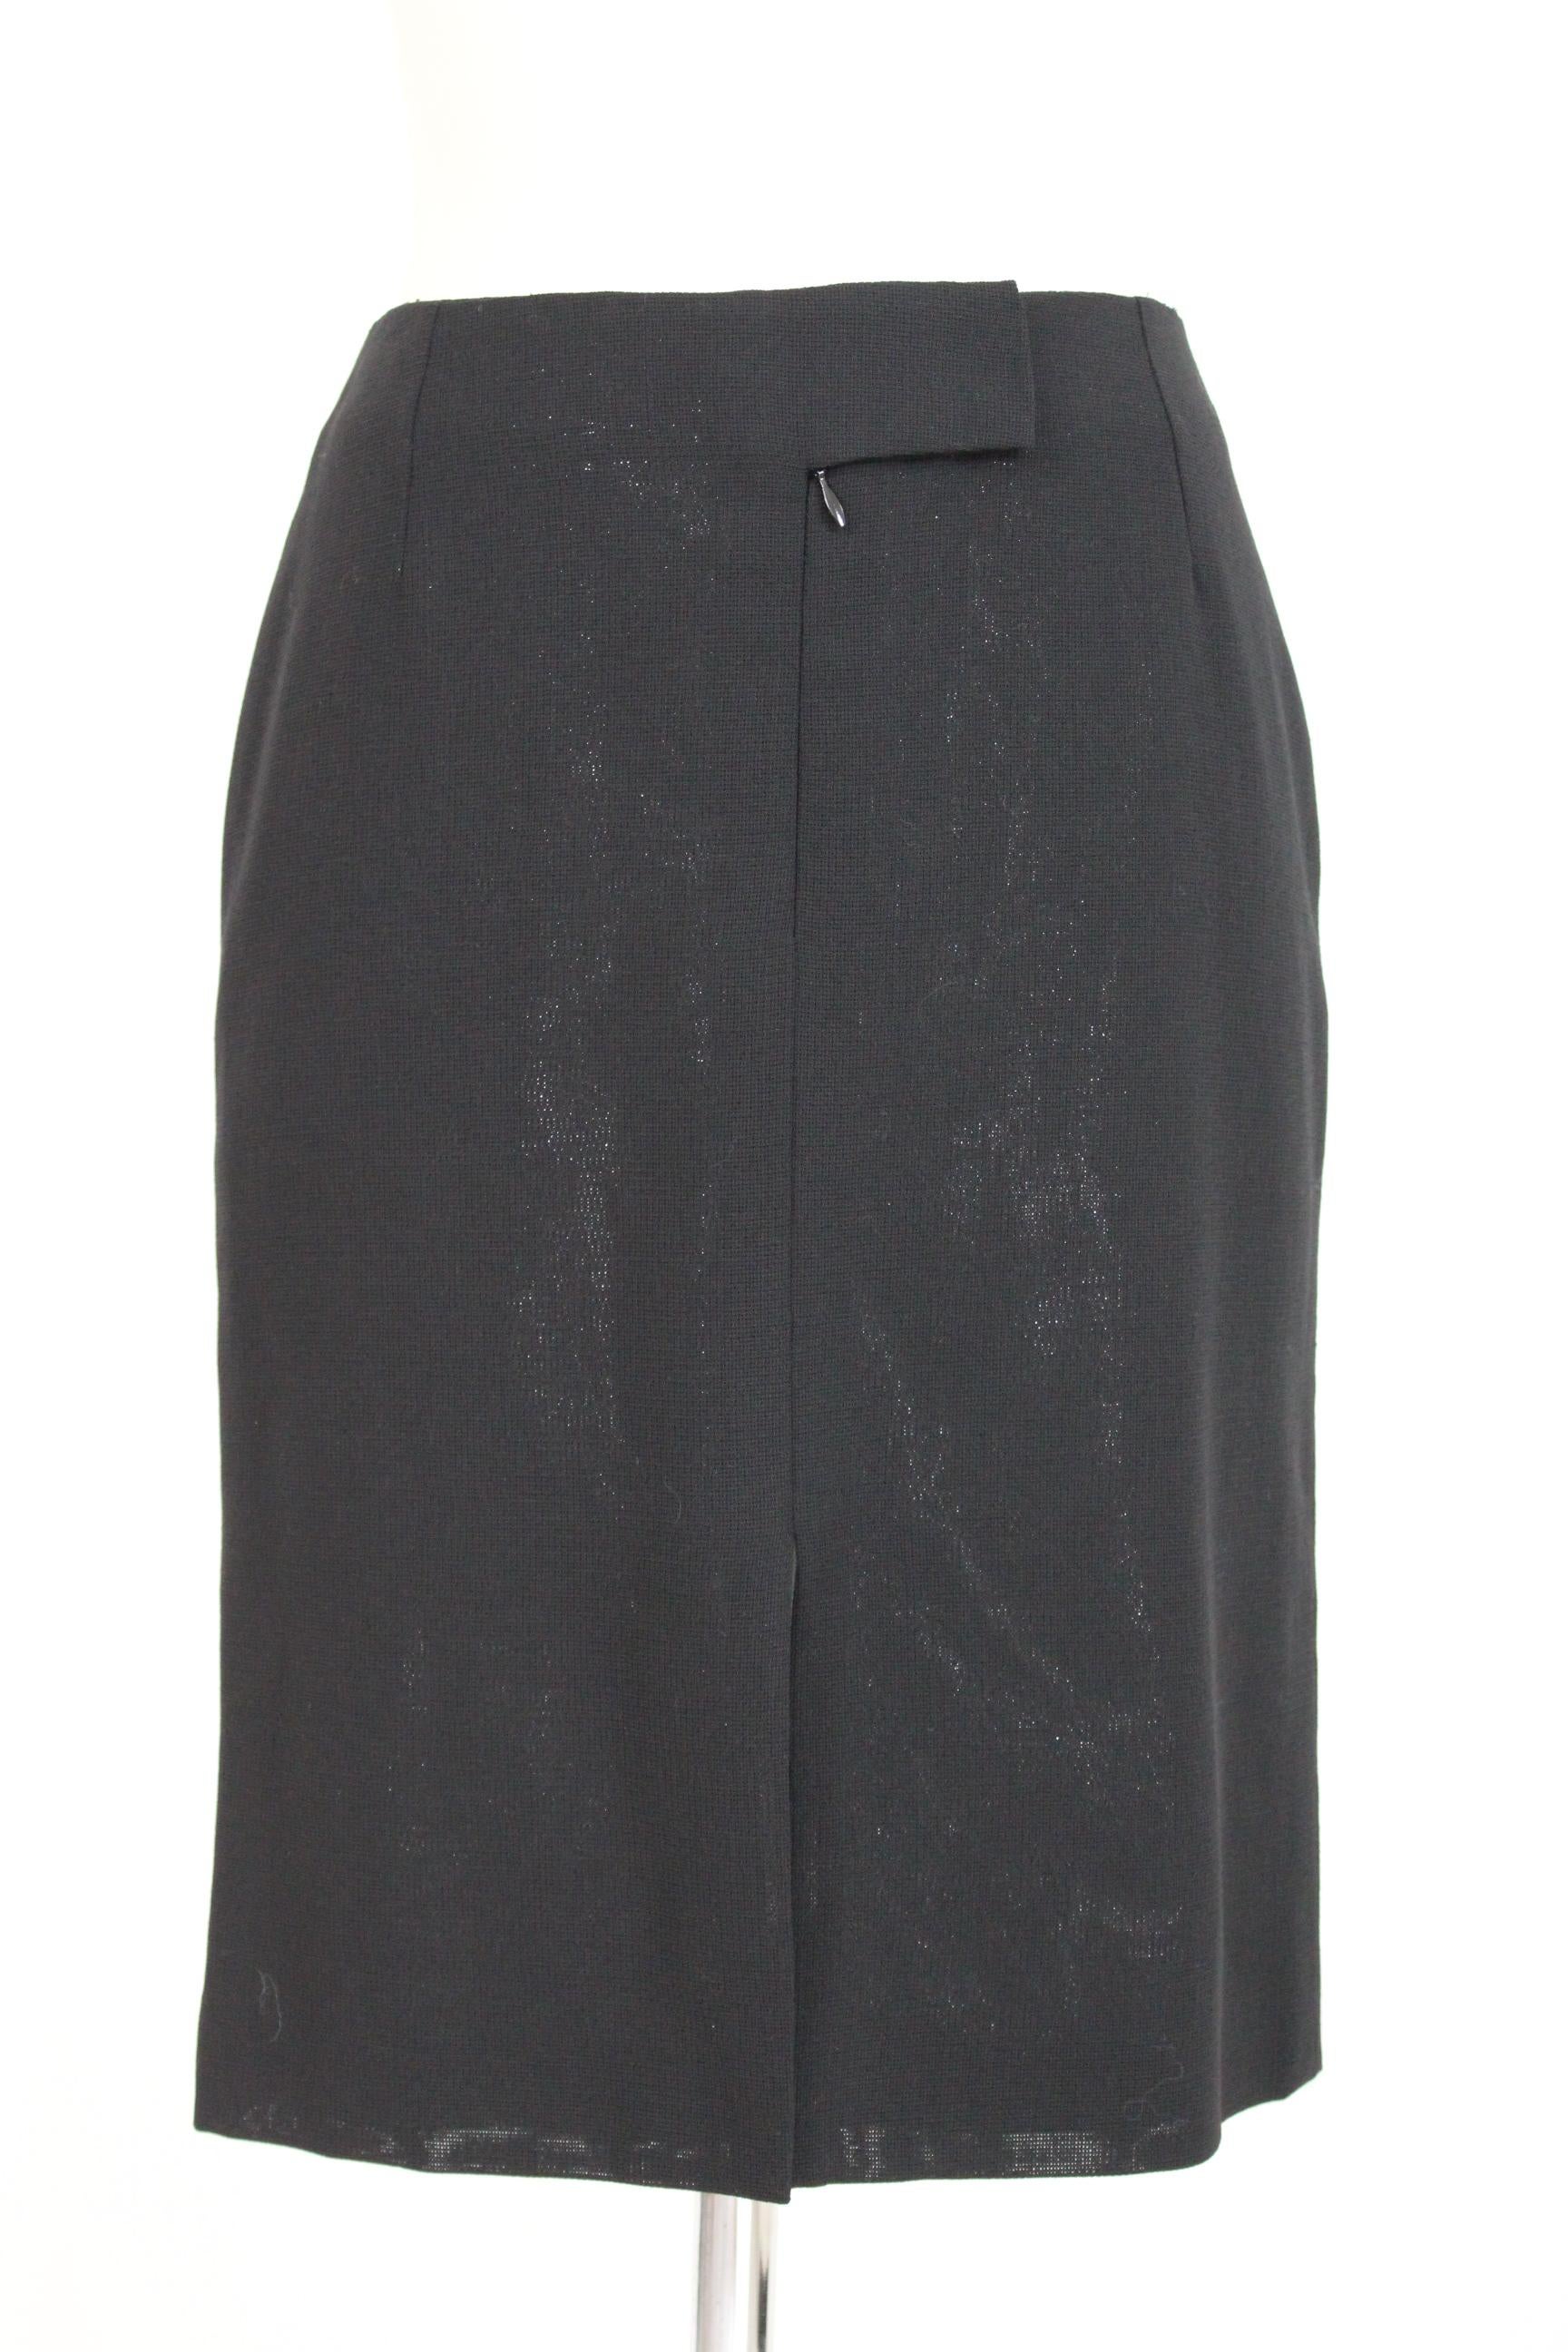 Gianni Versace Couture Black Silver Silk Wool Lamè Evening Skirt Suit 1980s In Excellent Condition For Sale In Brindisi, Bt